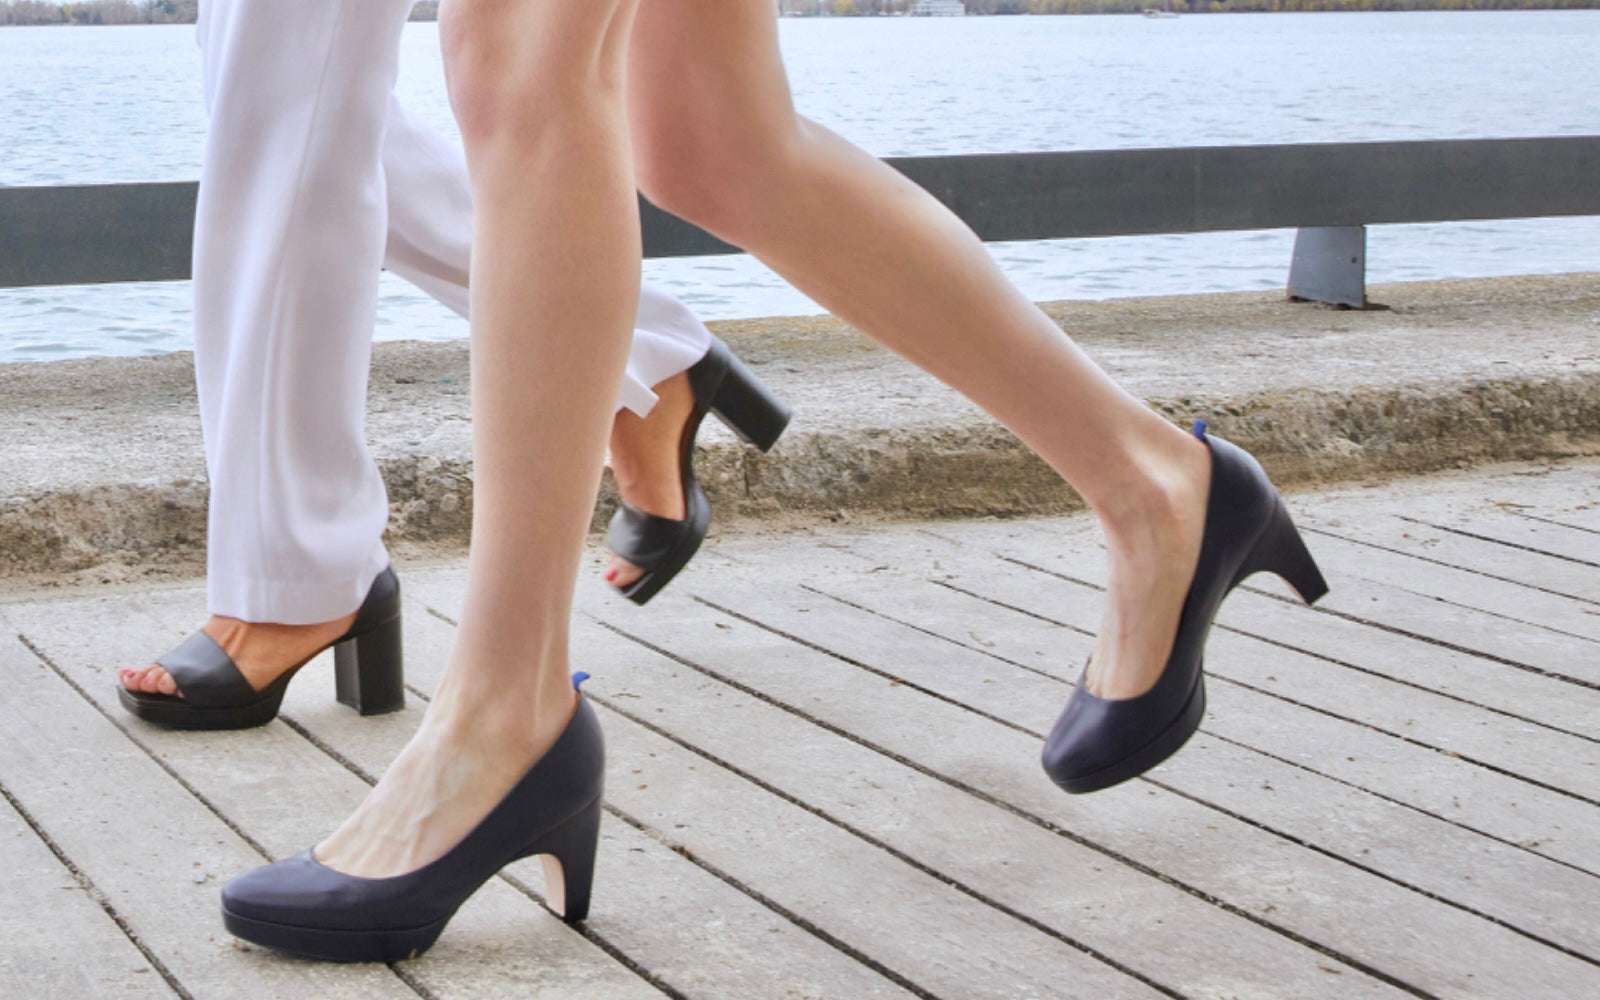 Can You Wear High-Heel Shoes After Having Big Toe Fusion Surgery